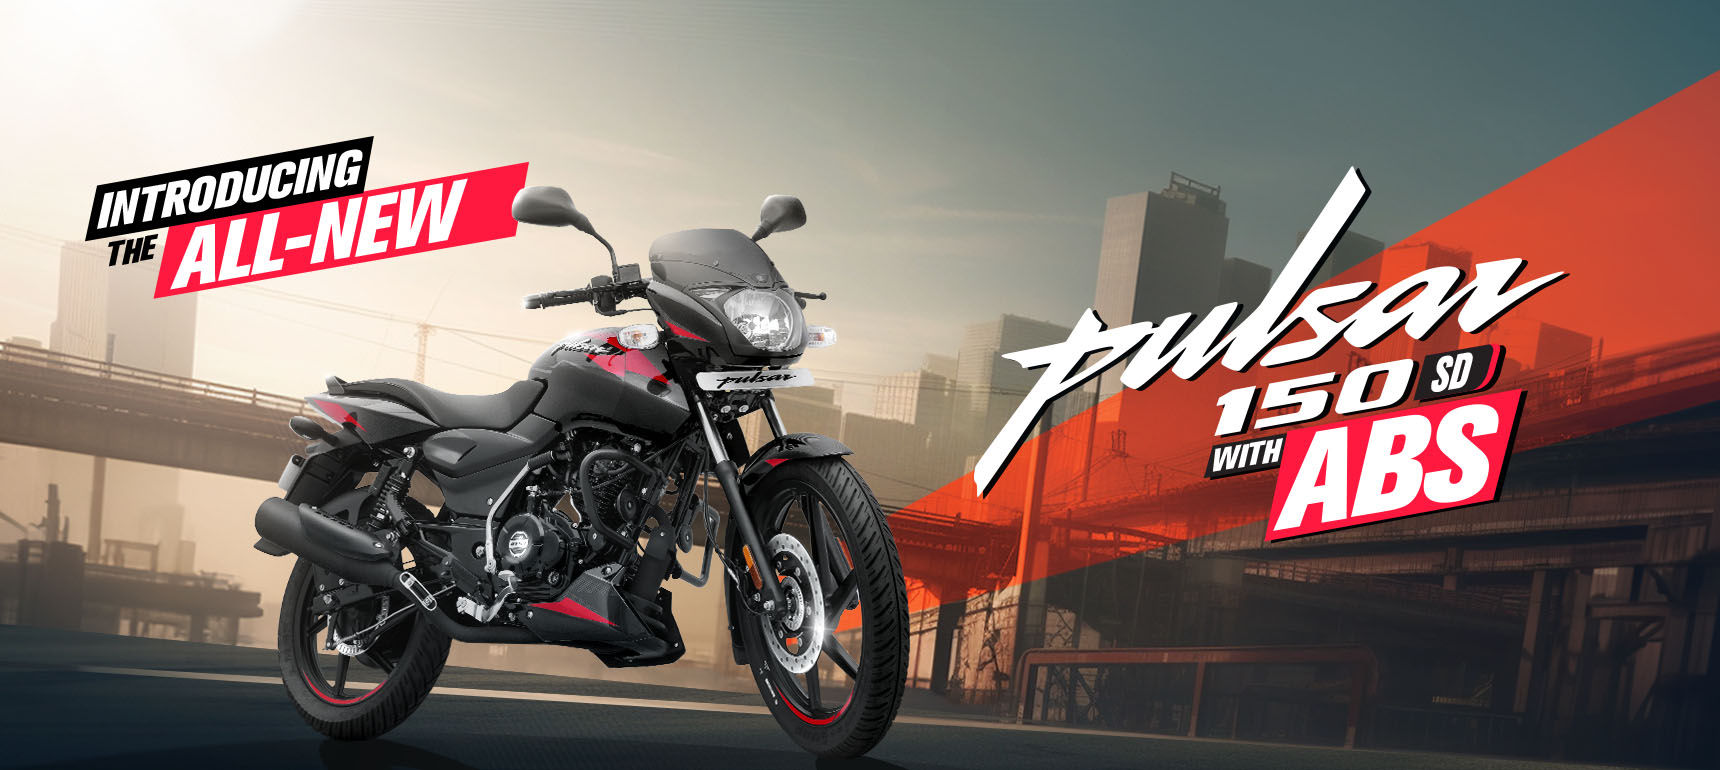 Introducing the all new Pulsar-150 Single Disc with ABS in Bangladesh